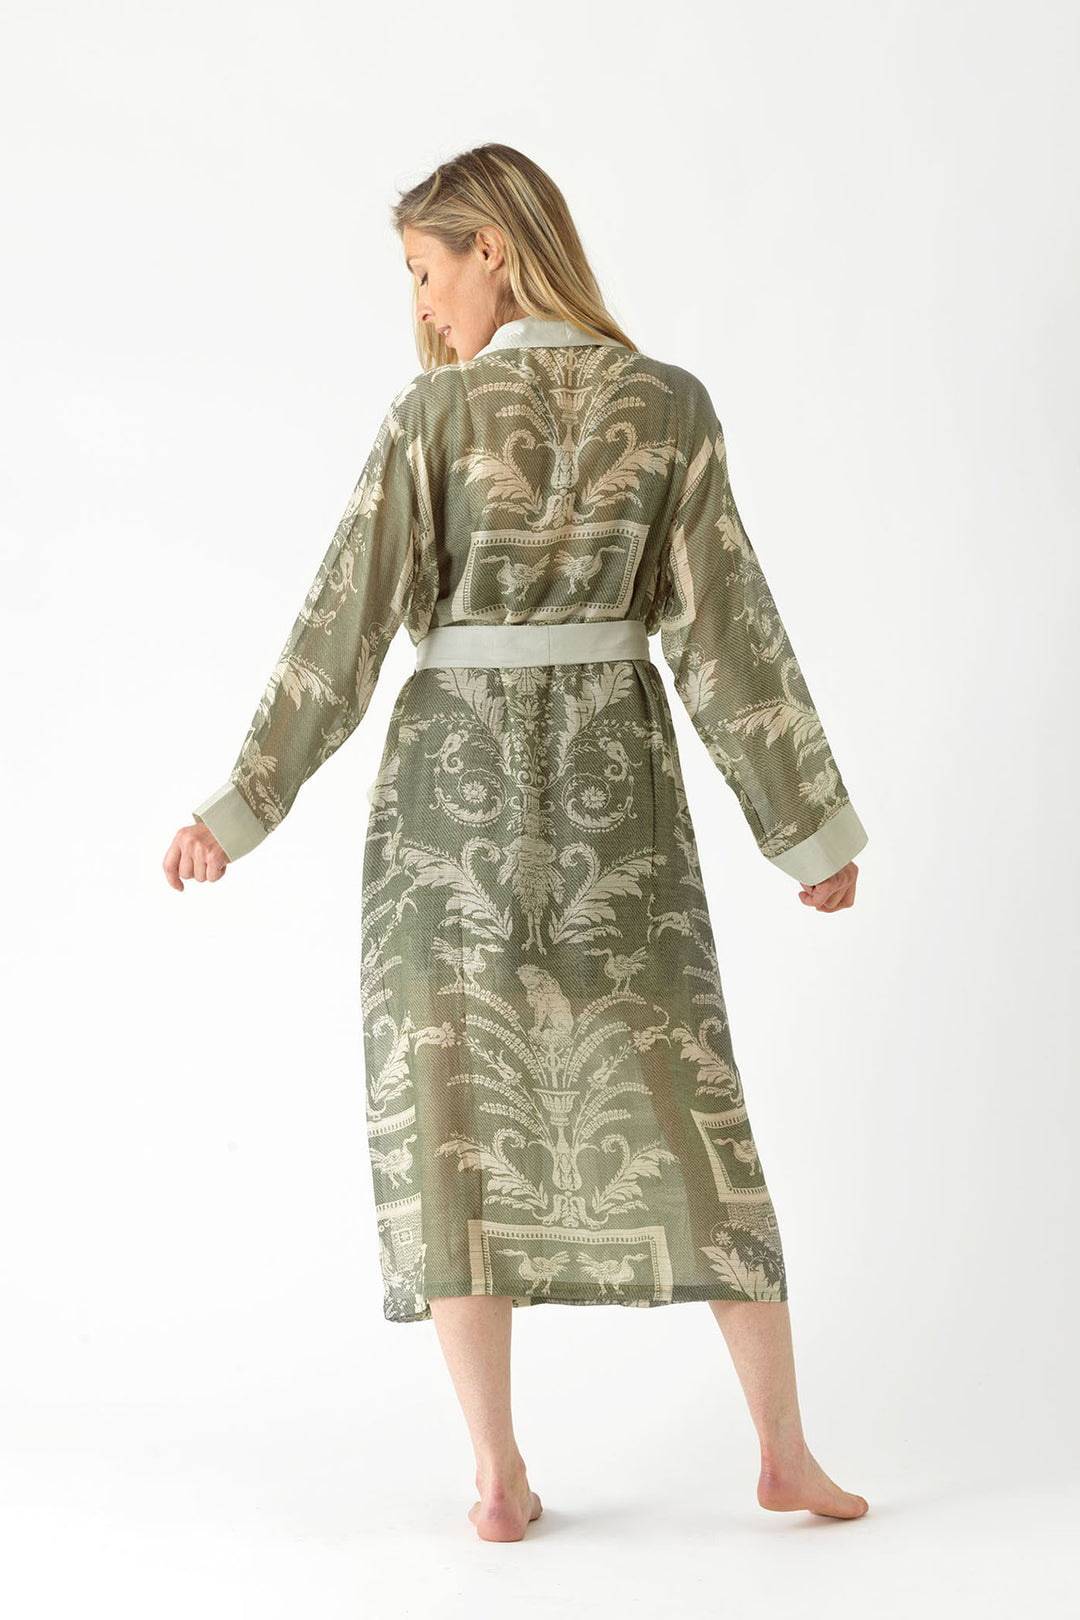 ladies belted dressing gown in sage green vintage damask print by One Hundred Stars